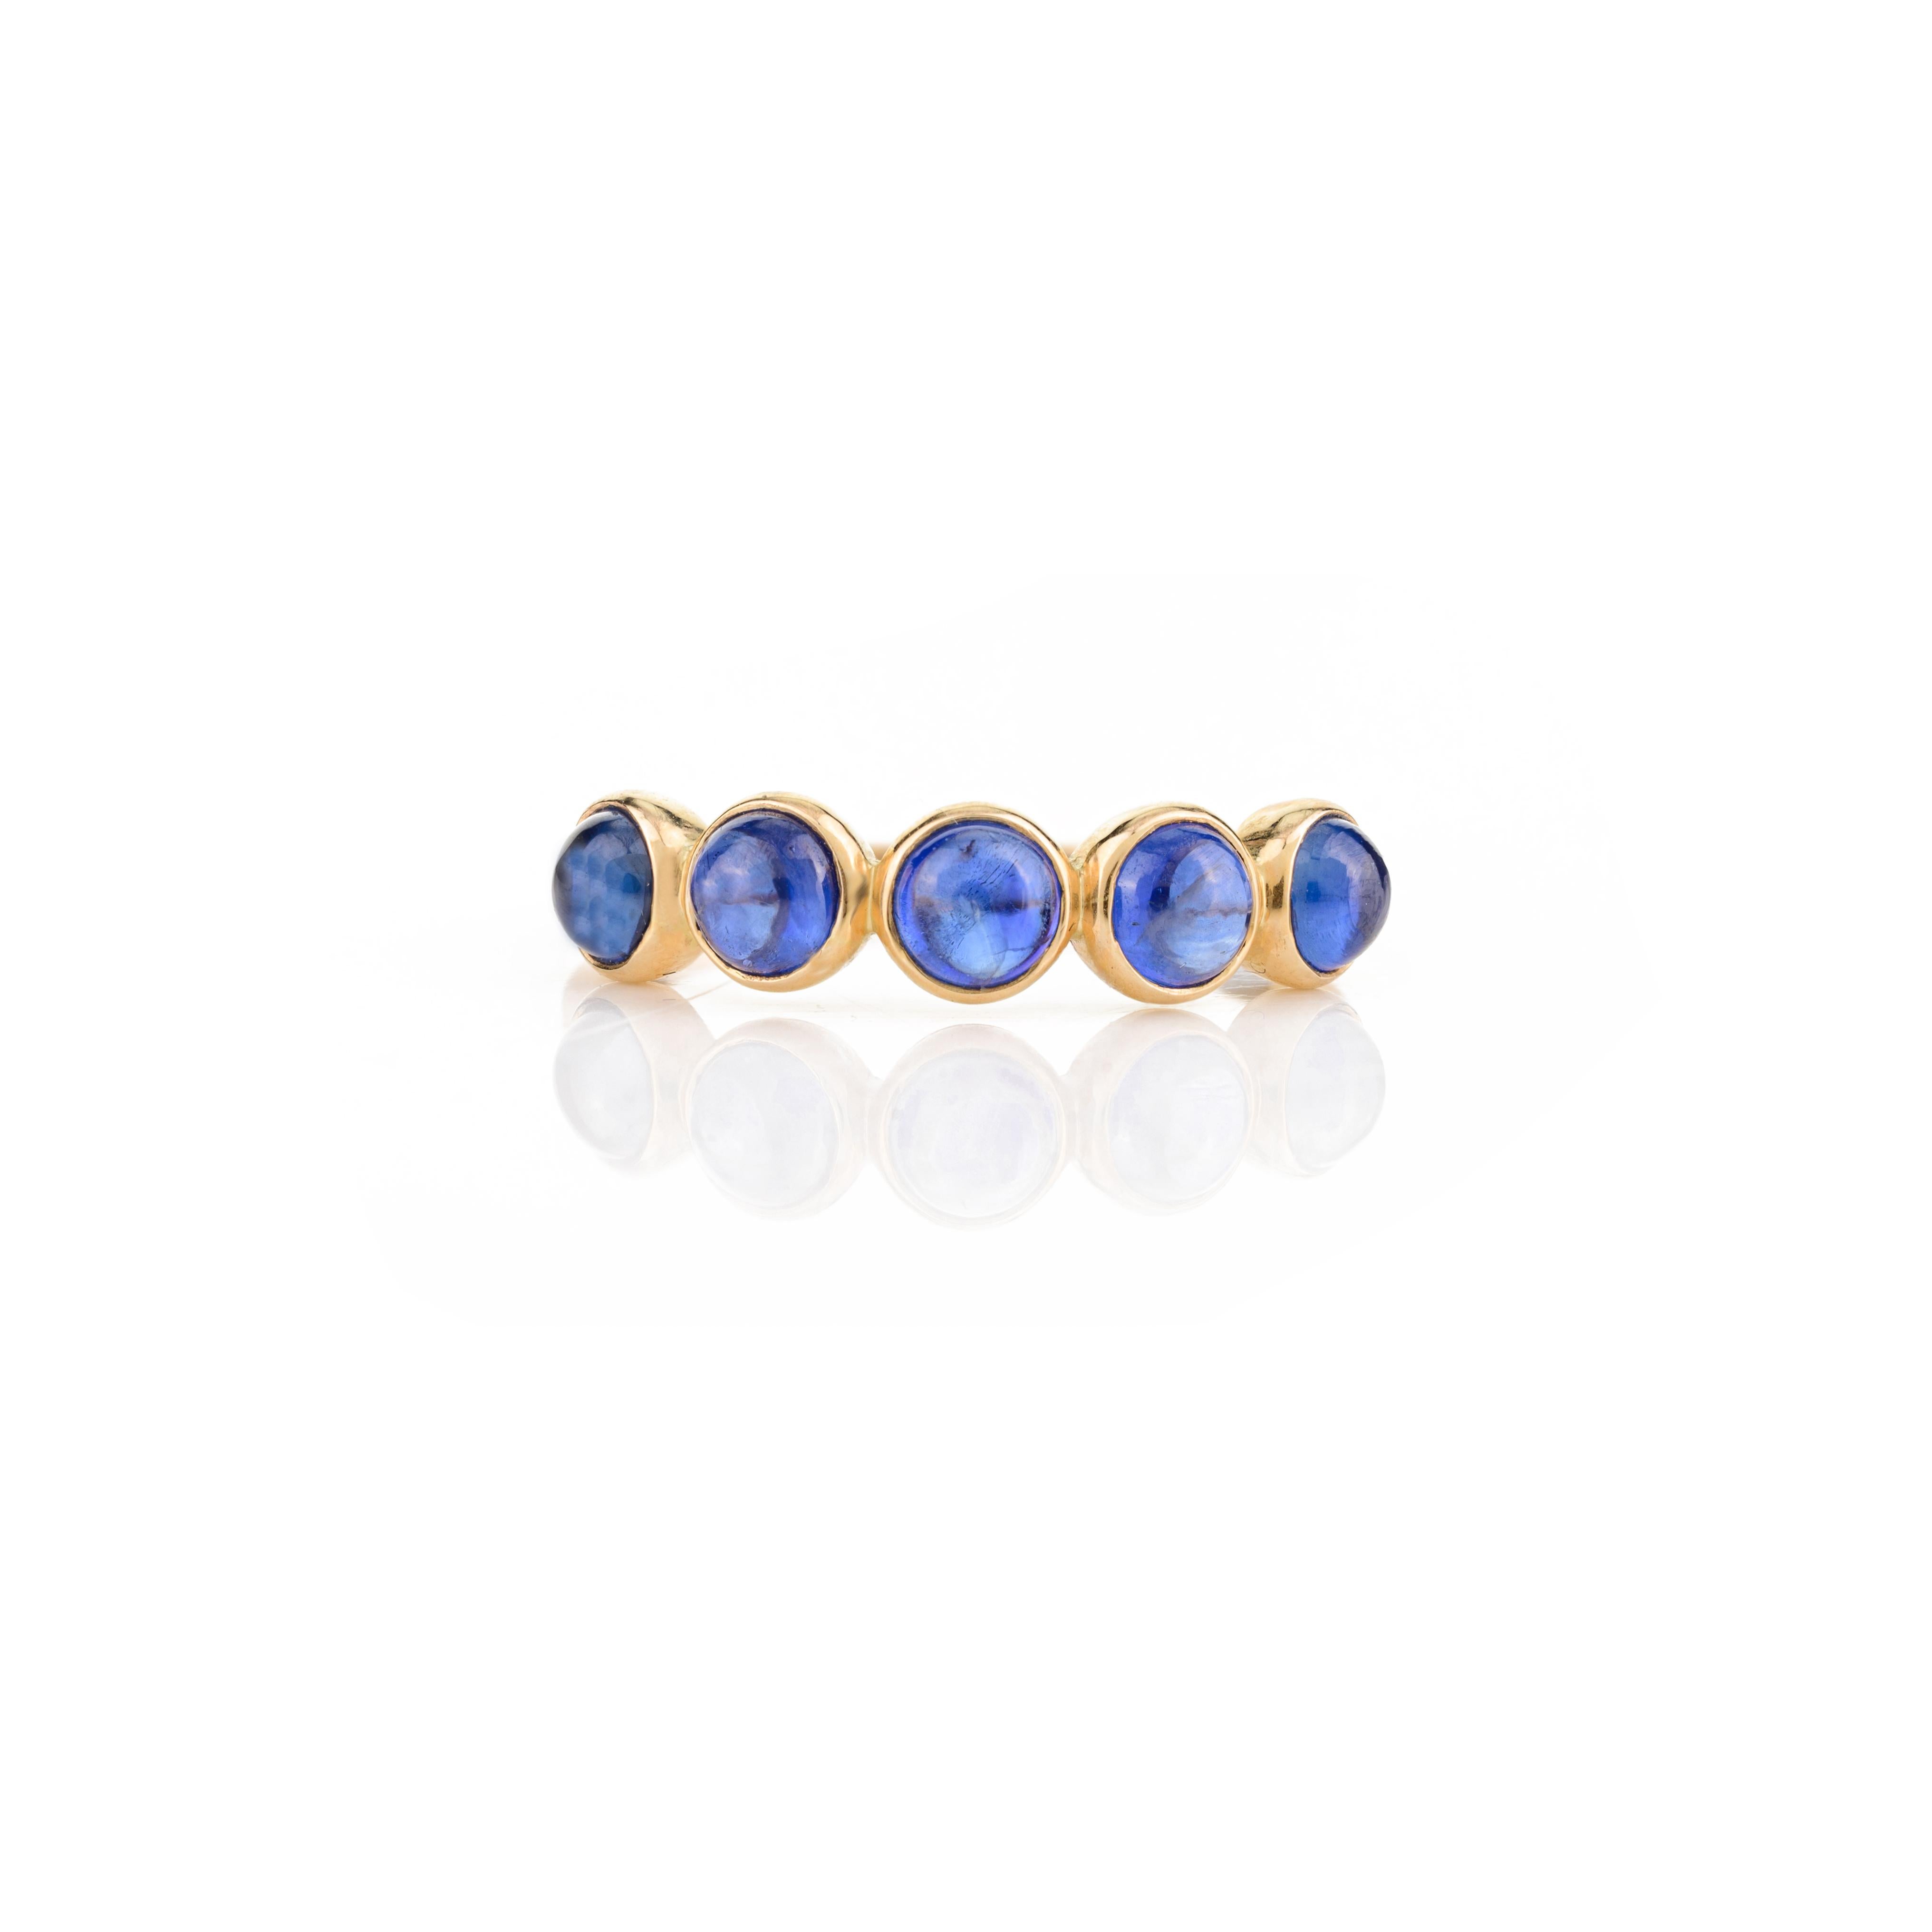 For Sale:  Blue Sapphire Bezel Set Band Stacking Ring in 14k Solid Yellow Gold Gift for Her 2